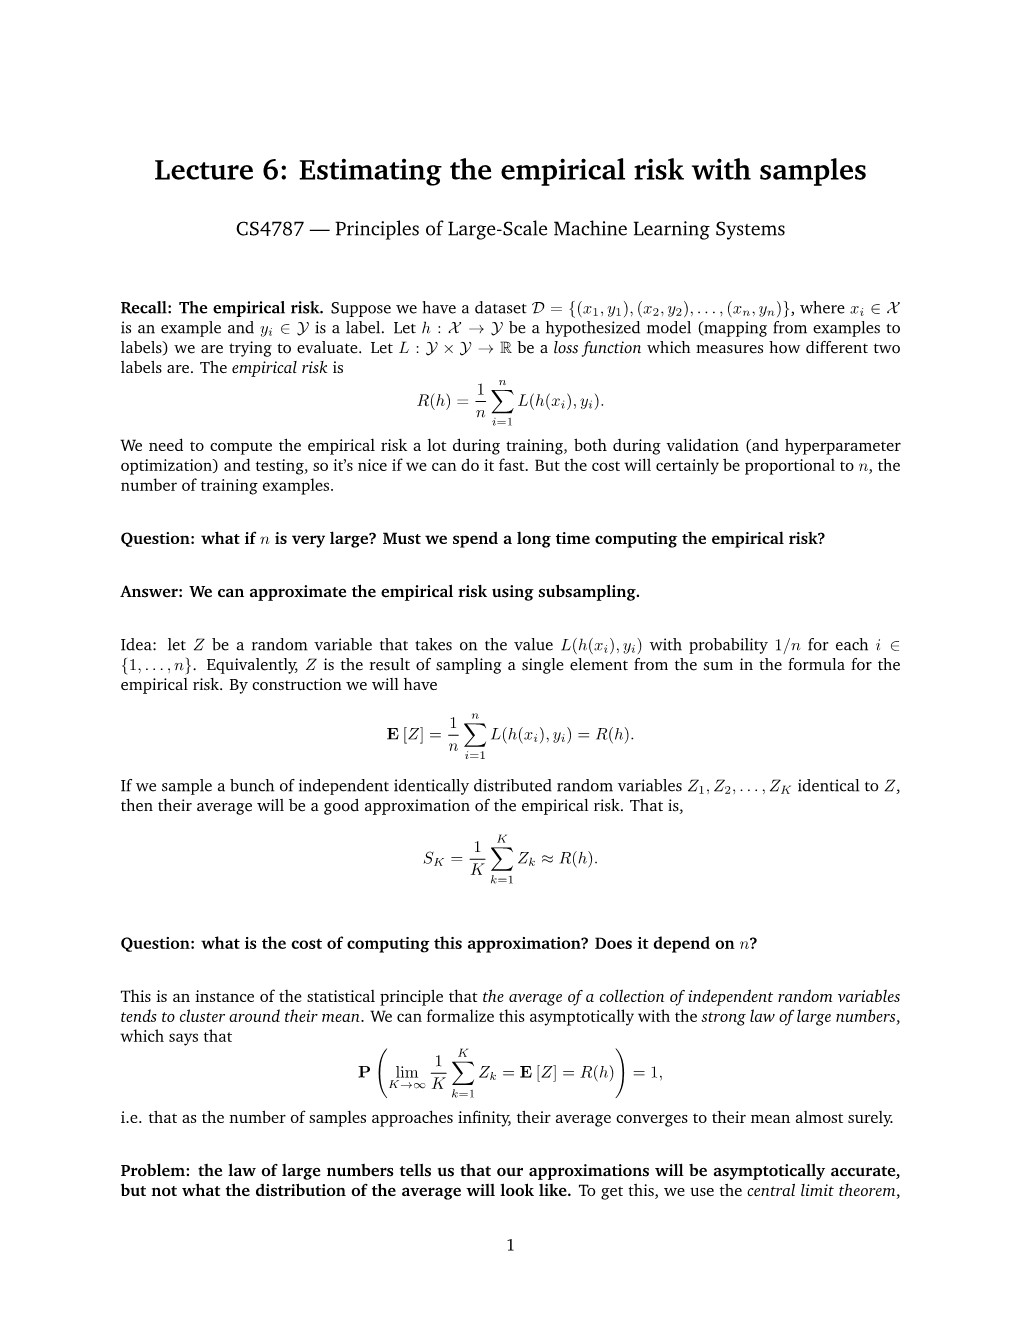 Lecture 6: Estimating the Empirical Risk with Samples